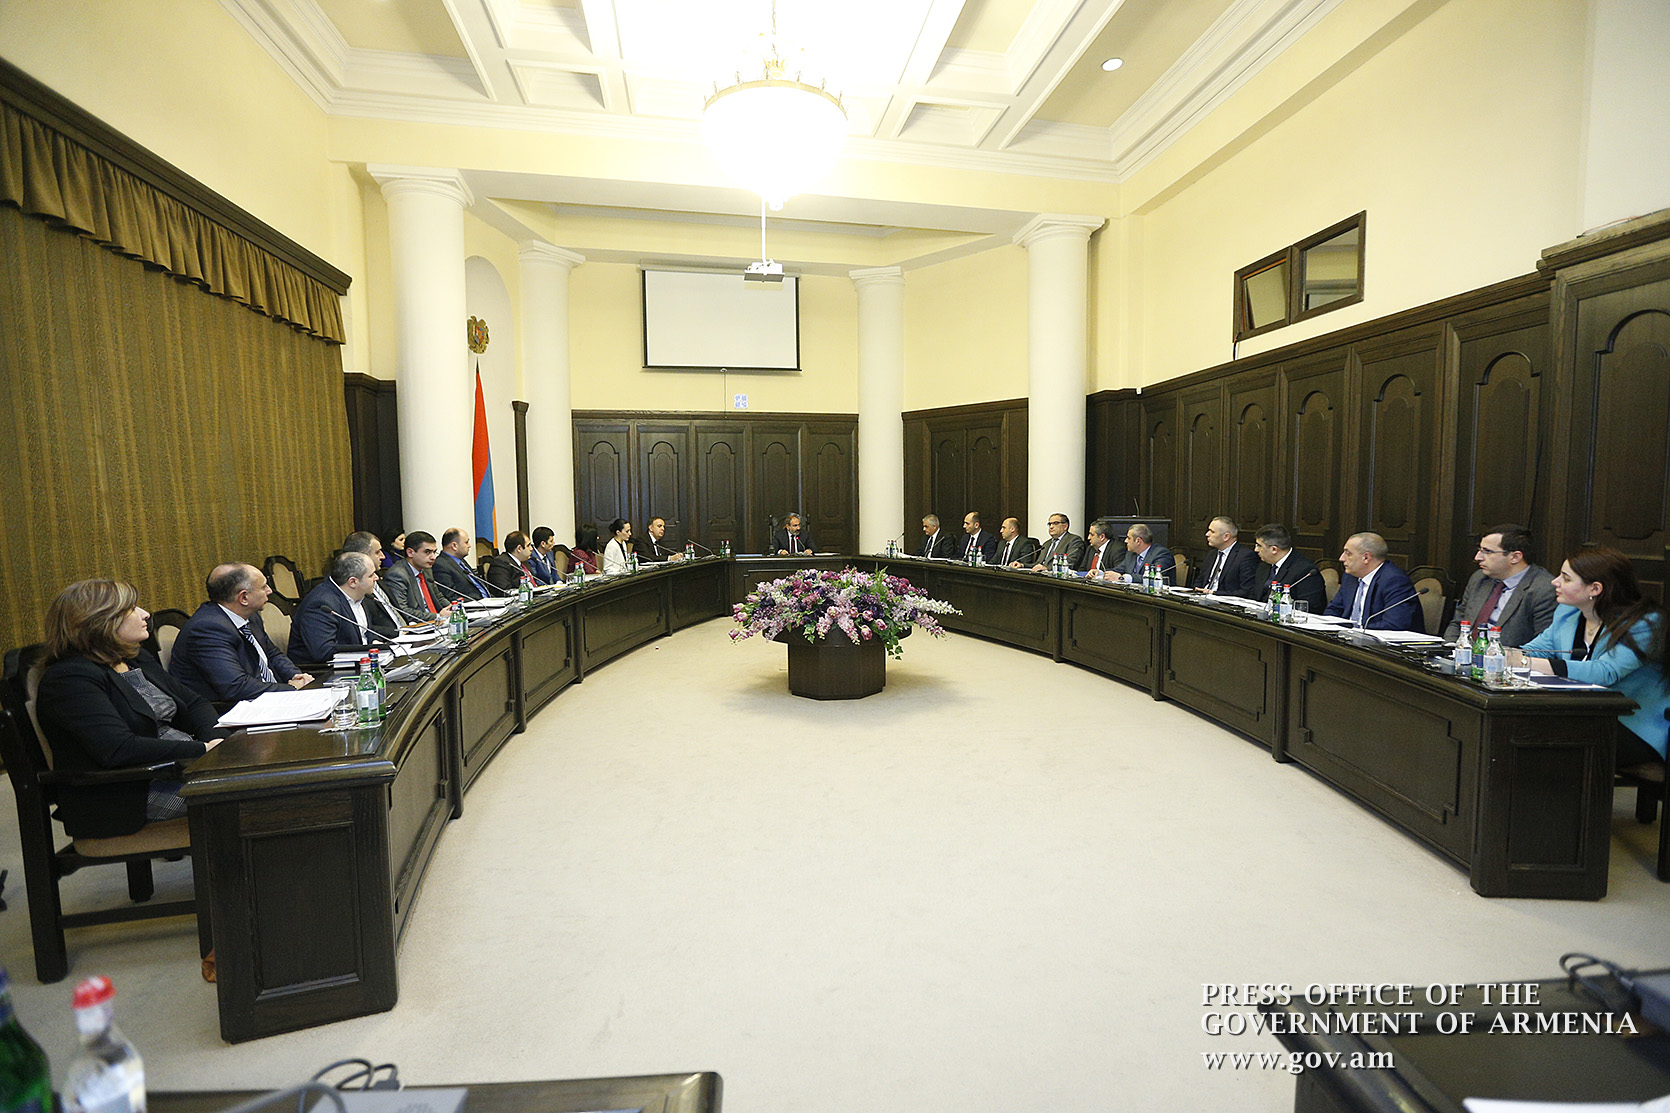 ‘We are entering the stage of compilation and implementation of extensive programs’ – Nikol Pashinyan attends a meeting of the interdepartmental commission on implementation of EU-Armenia Comprehensive and Enhanced Partnership Agreement